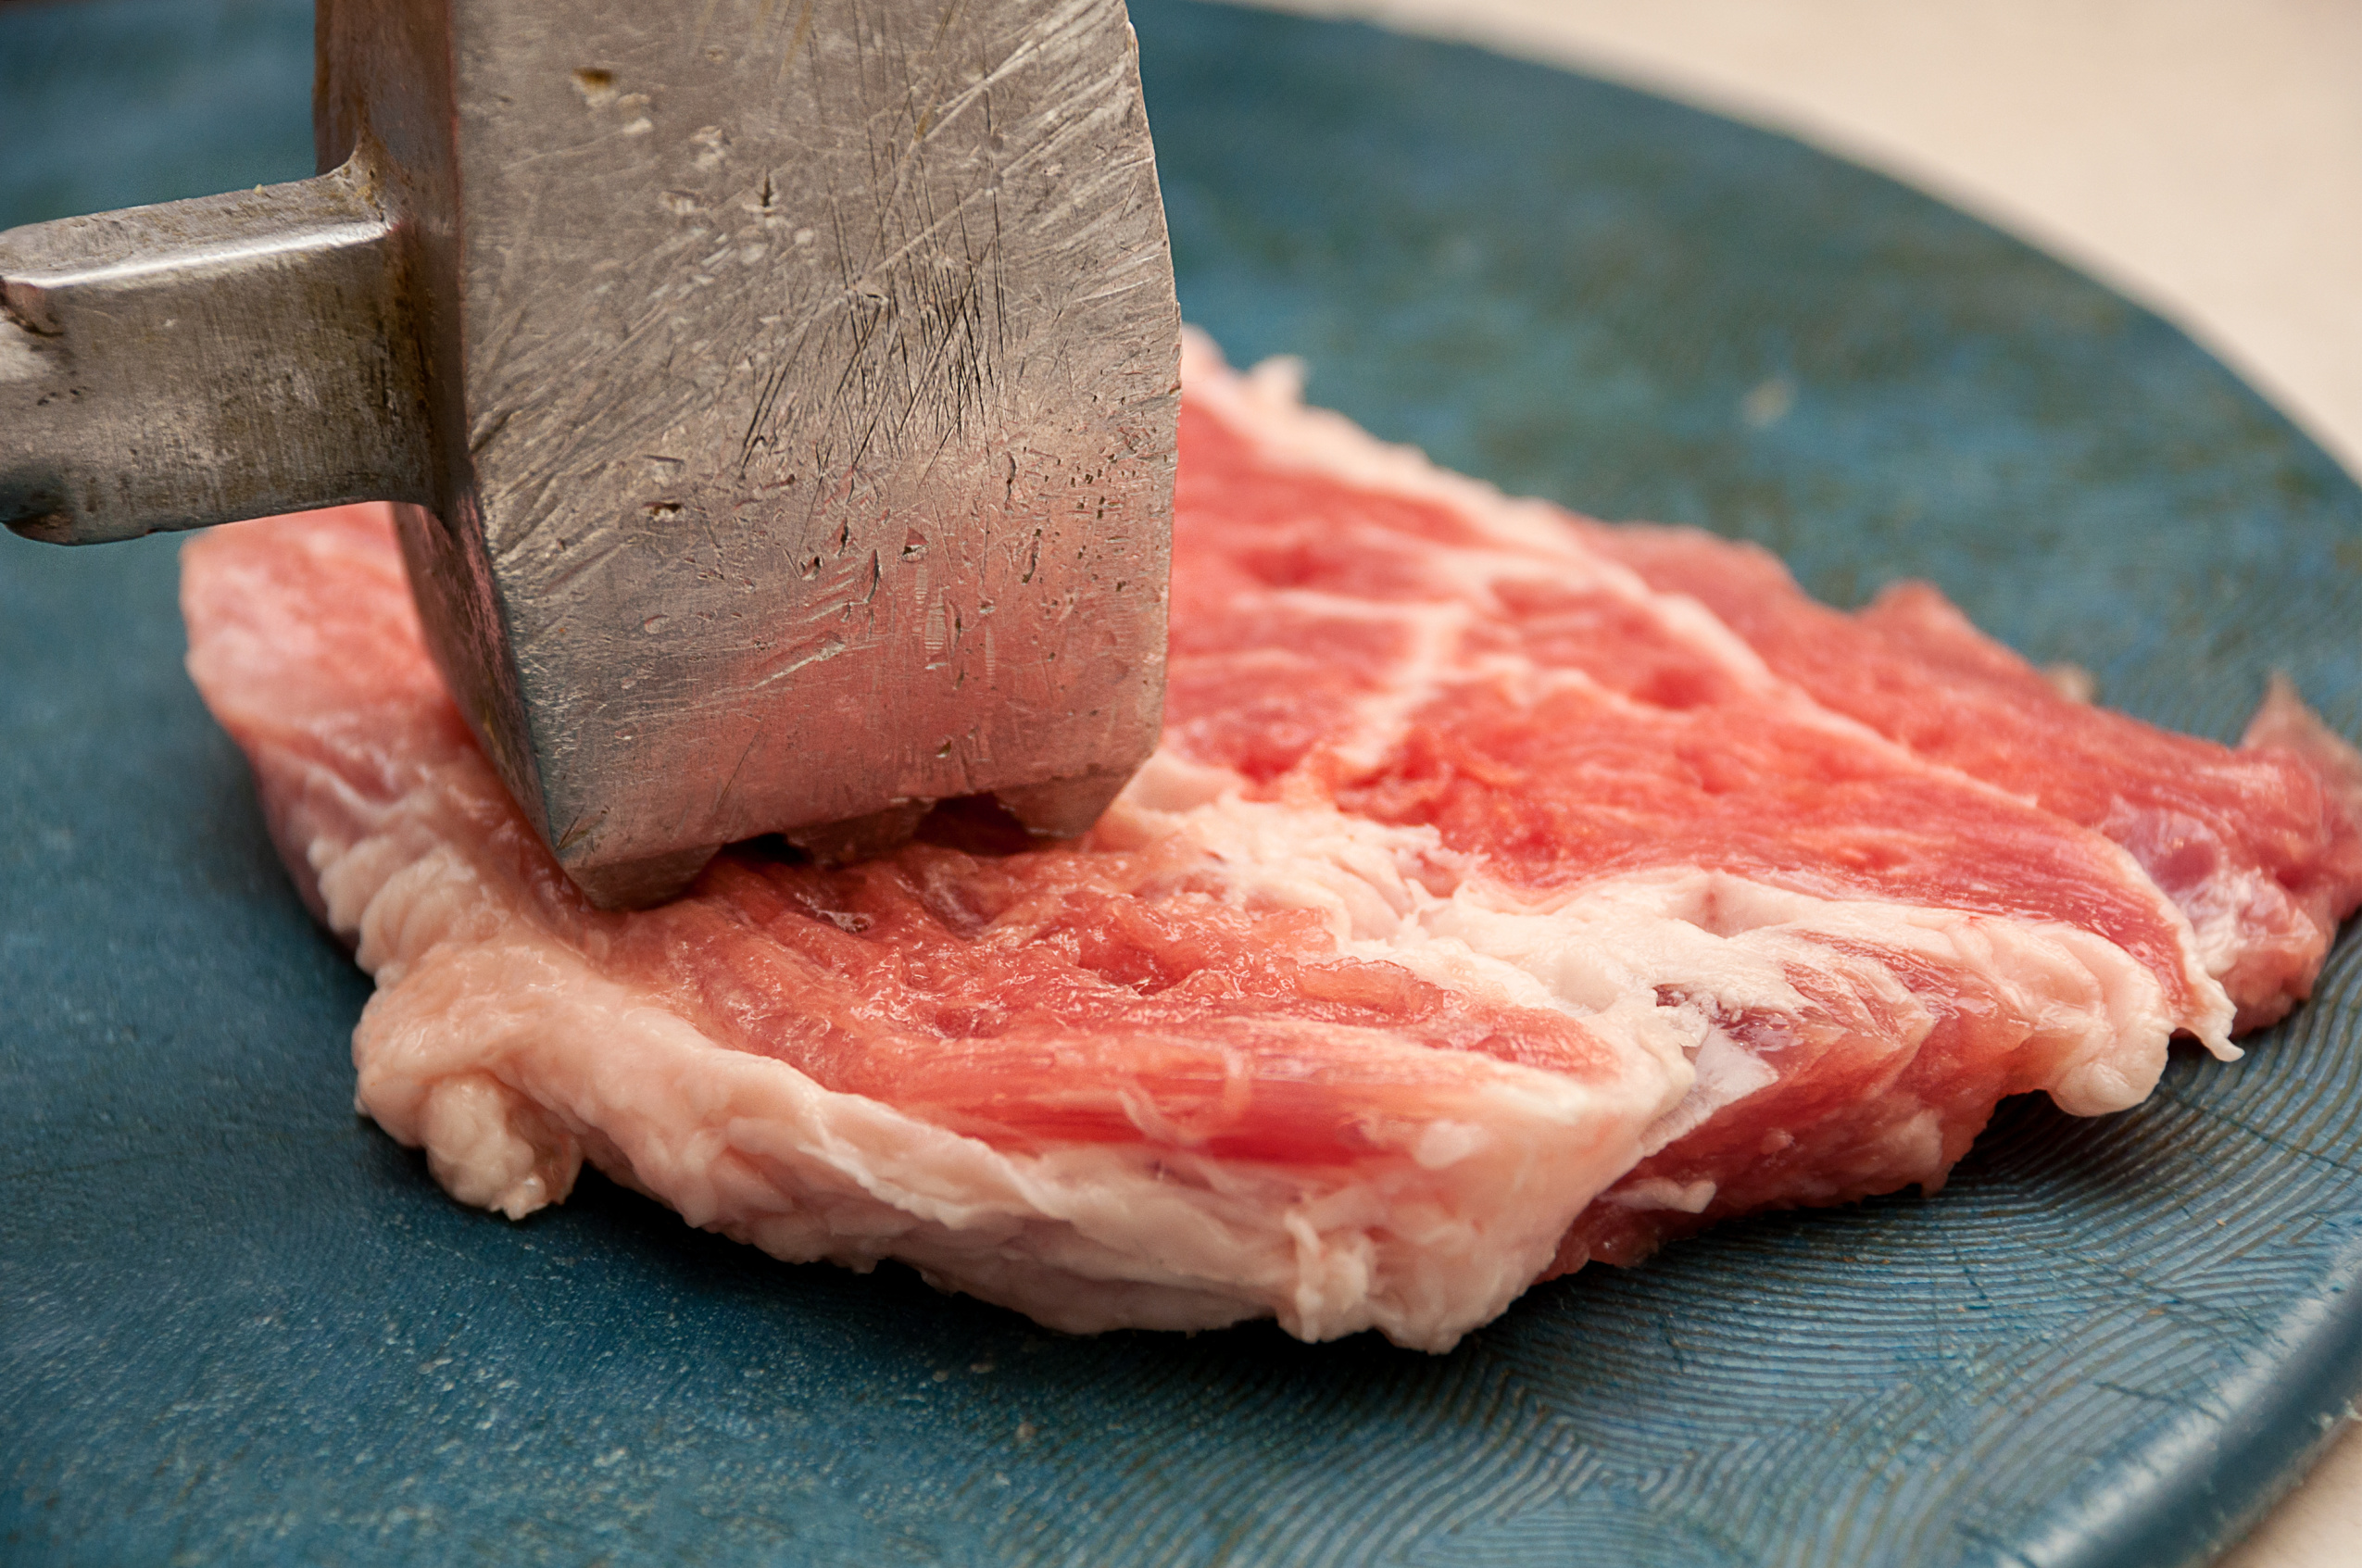 A mallet is being used on a meat